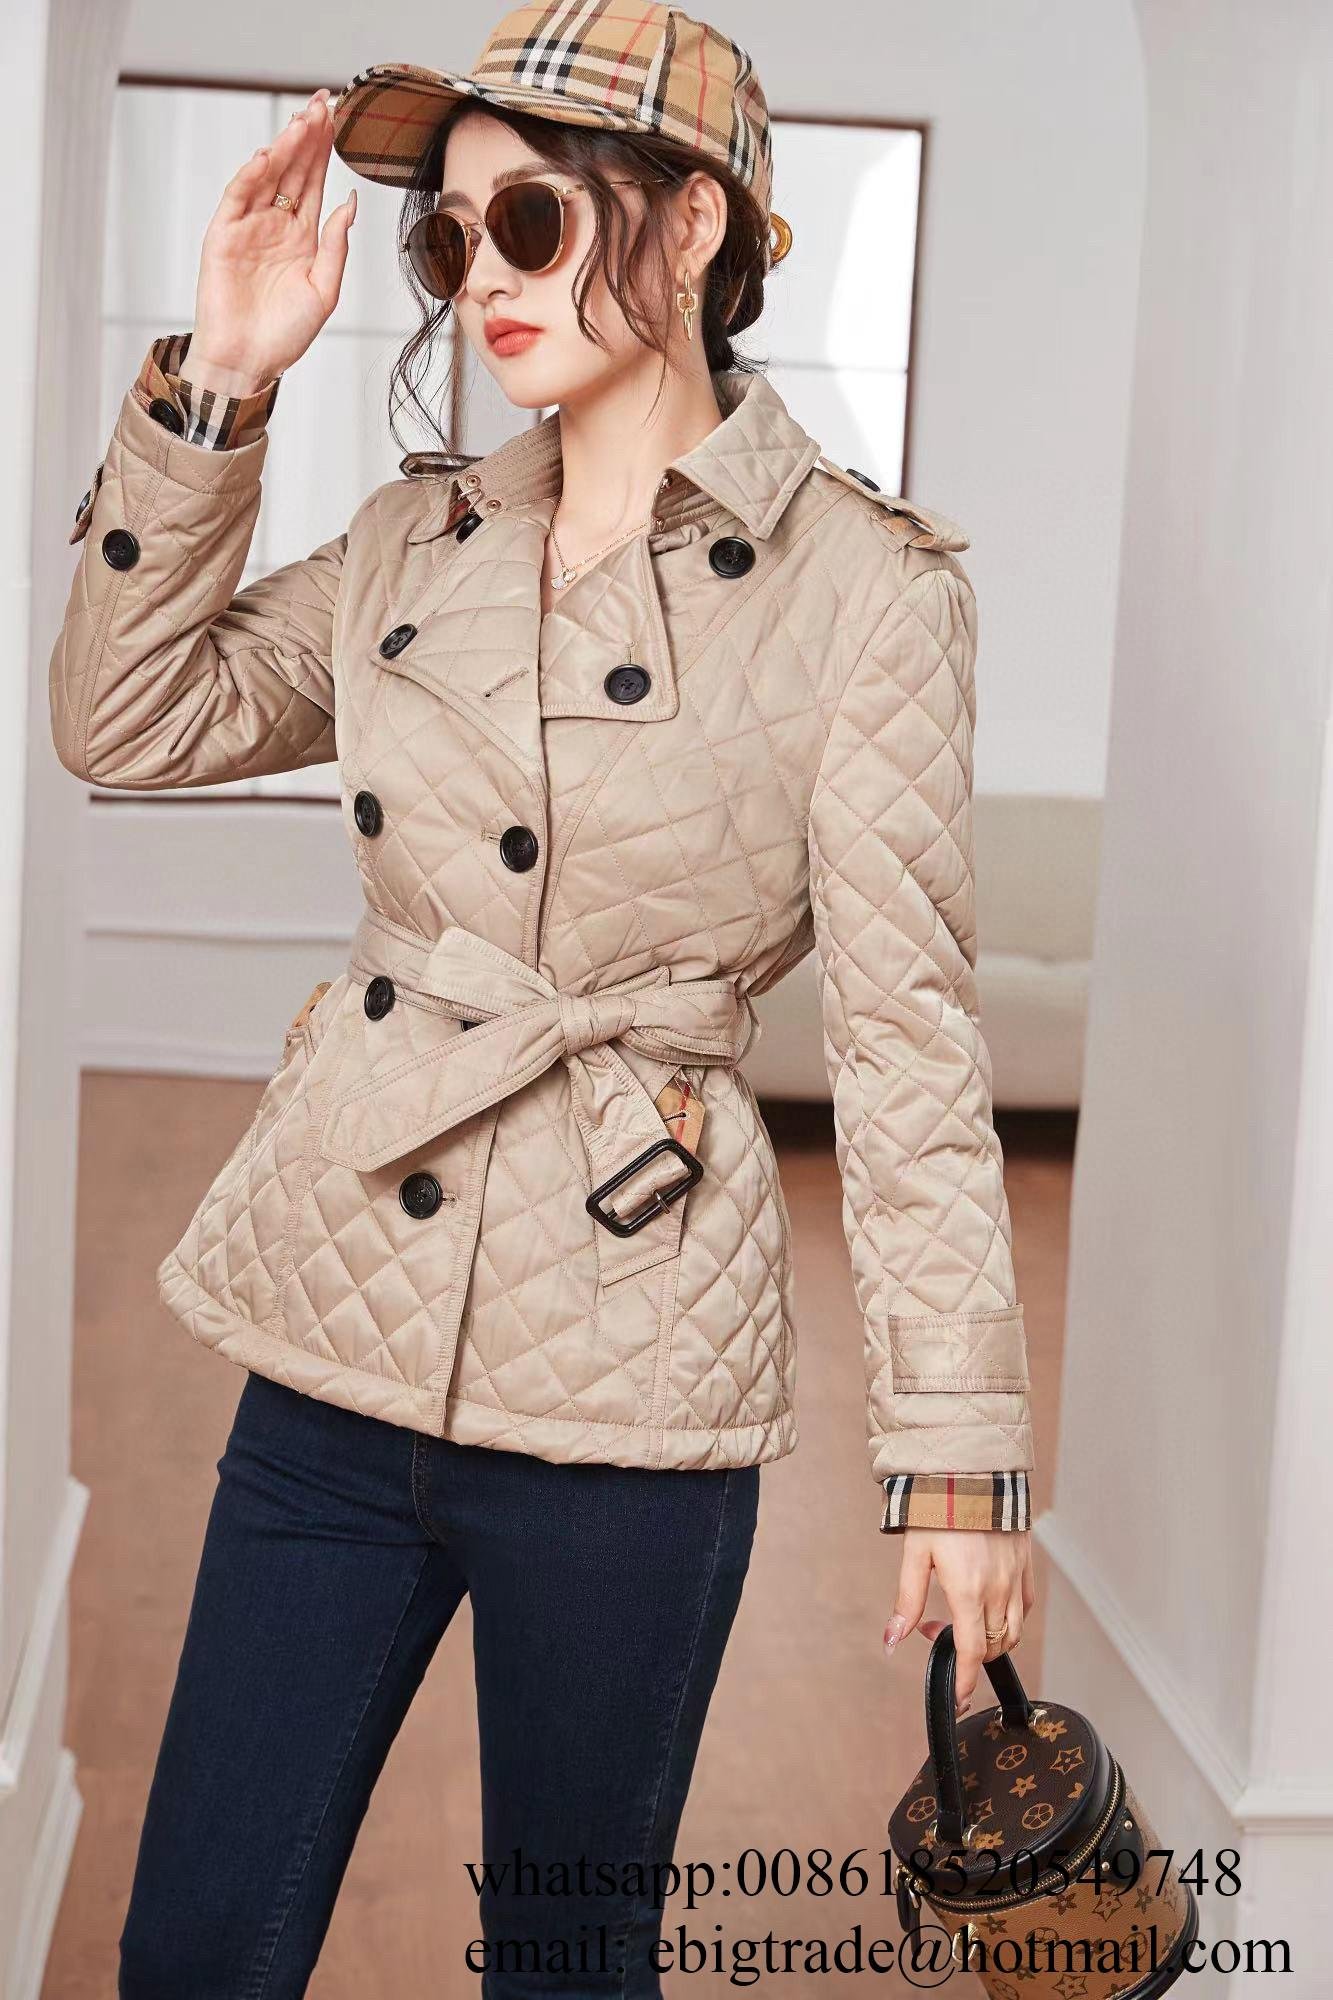 Cheap          Quilted Jacket Coat discount                   Jacket Women 4